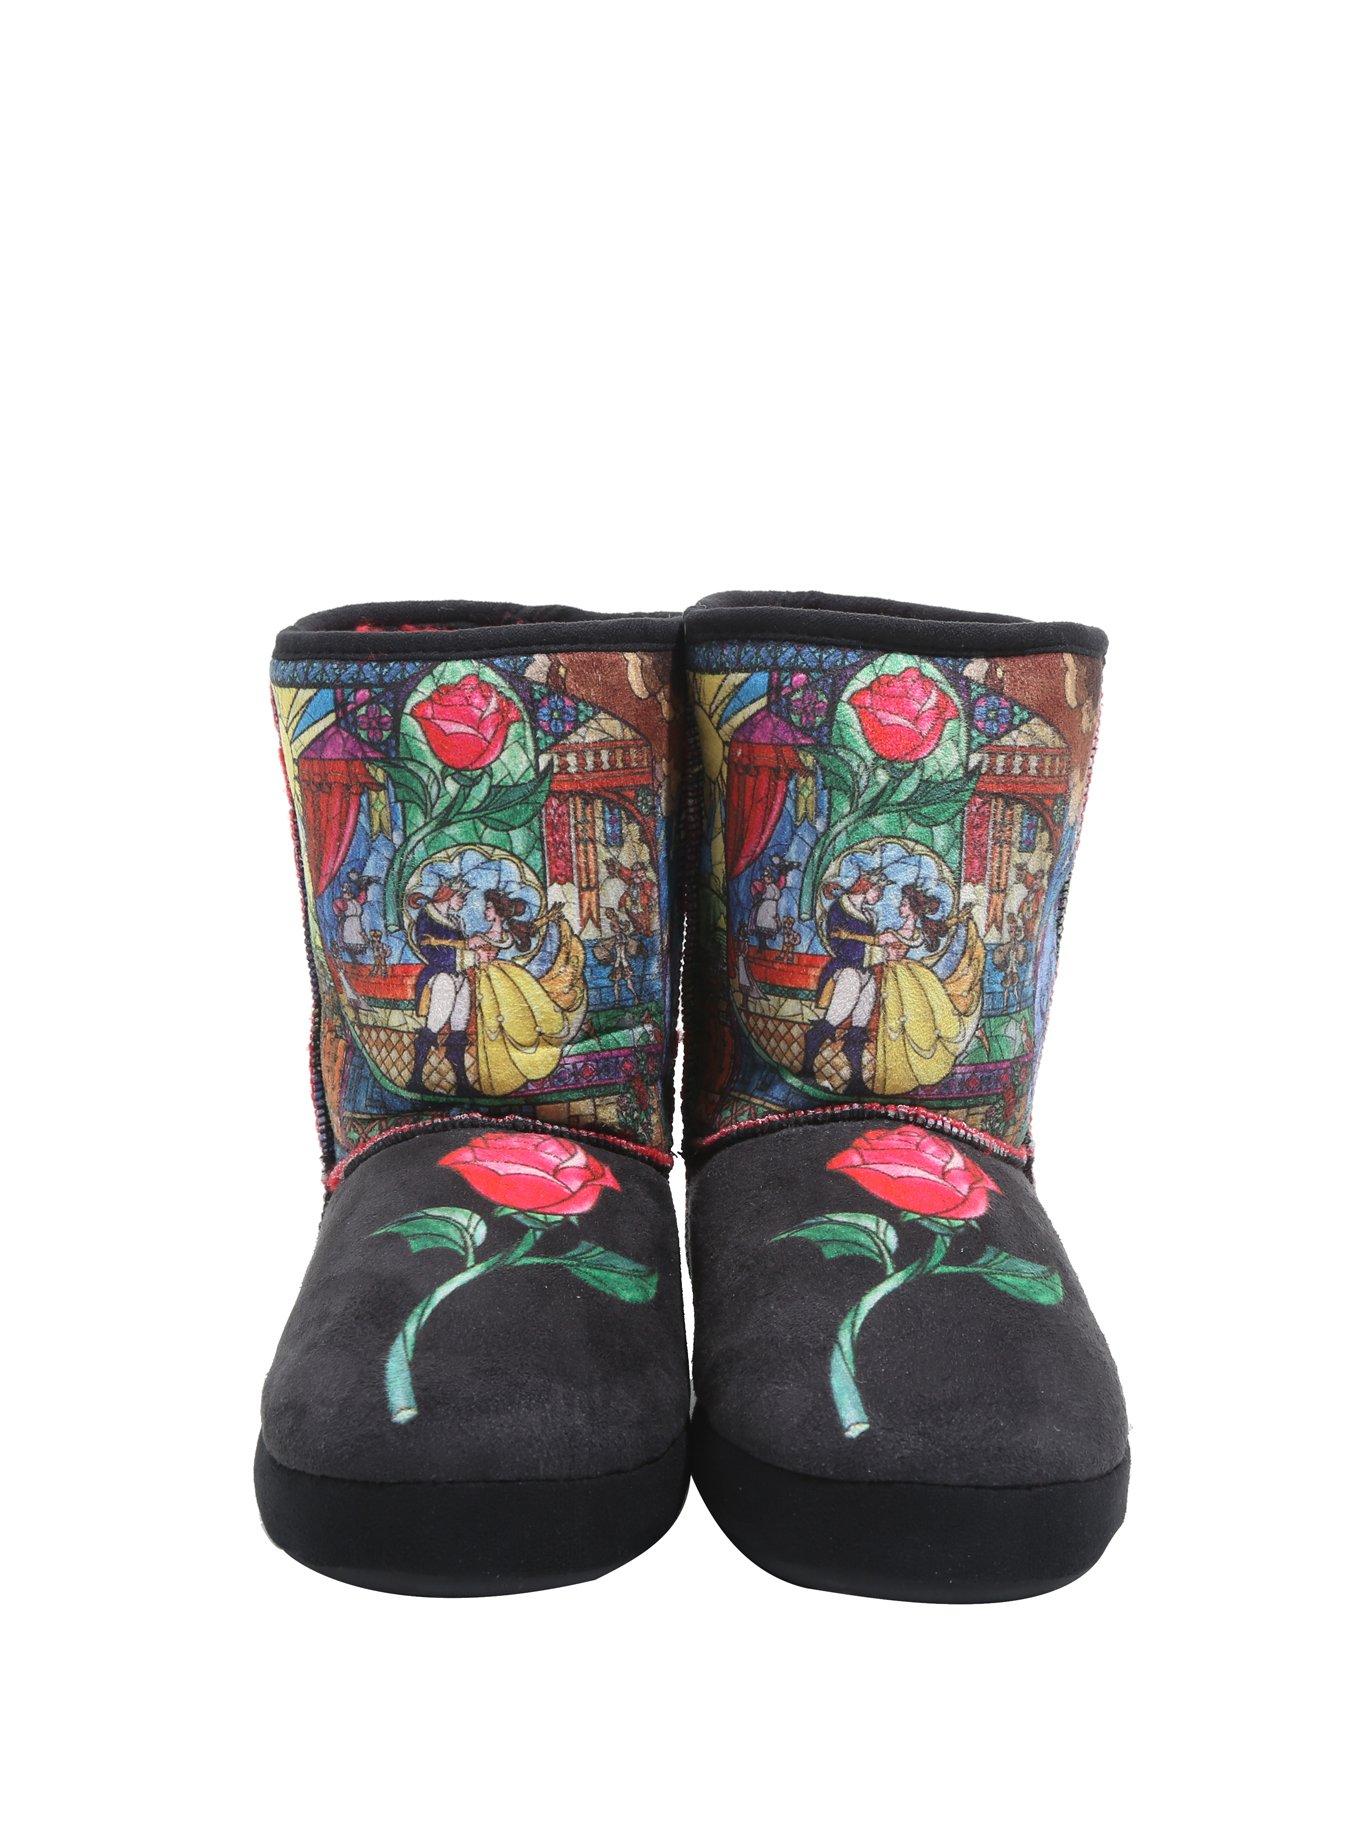 Disney Beauty And The Beast Stained Glass Slipper Boots, BLACK, hi-res